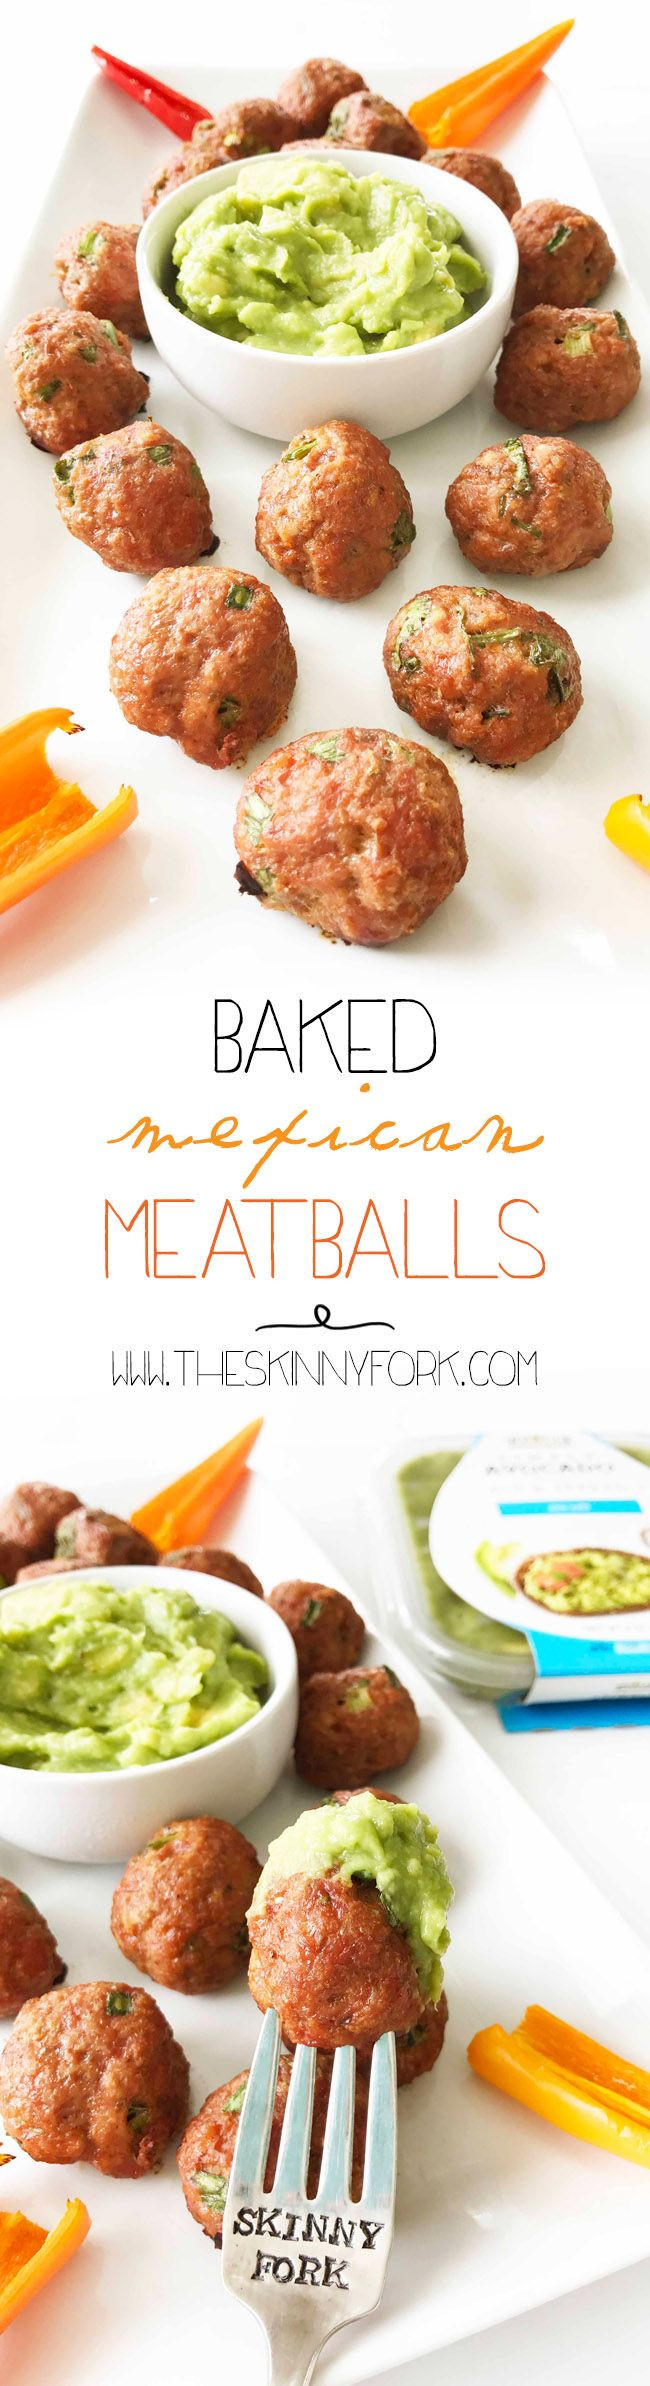 Healthy Mexican Appetizers
 Baked Mexican Meatballs Sponsored